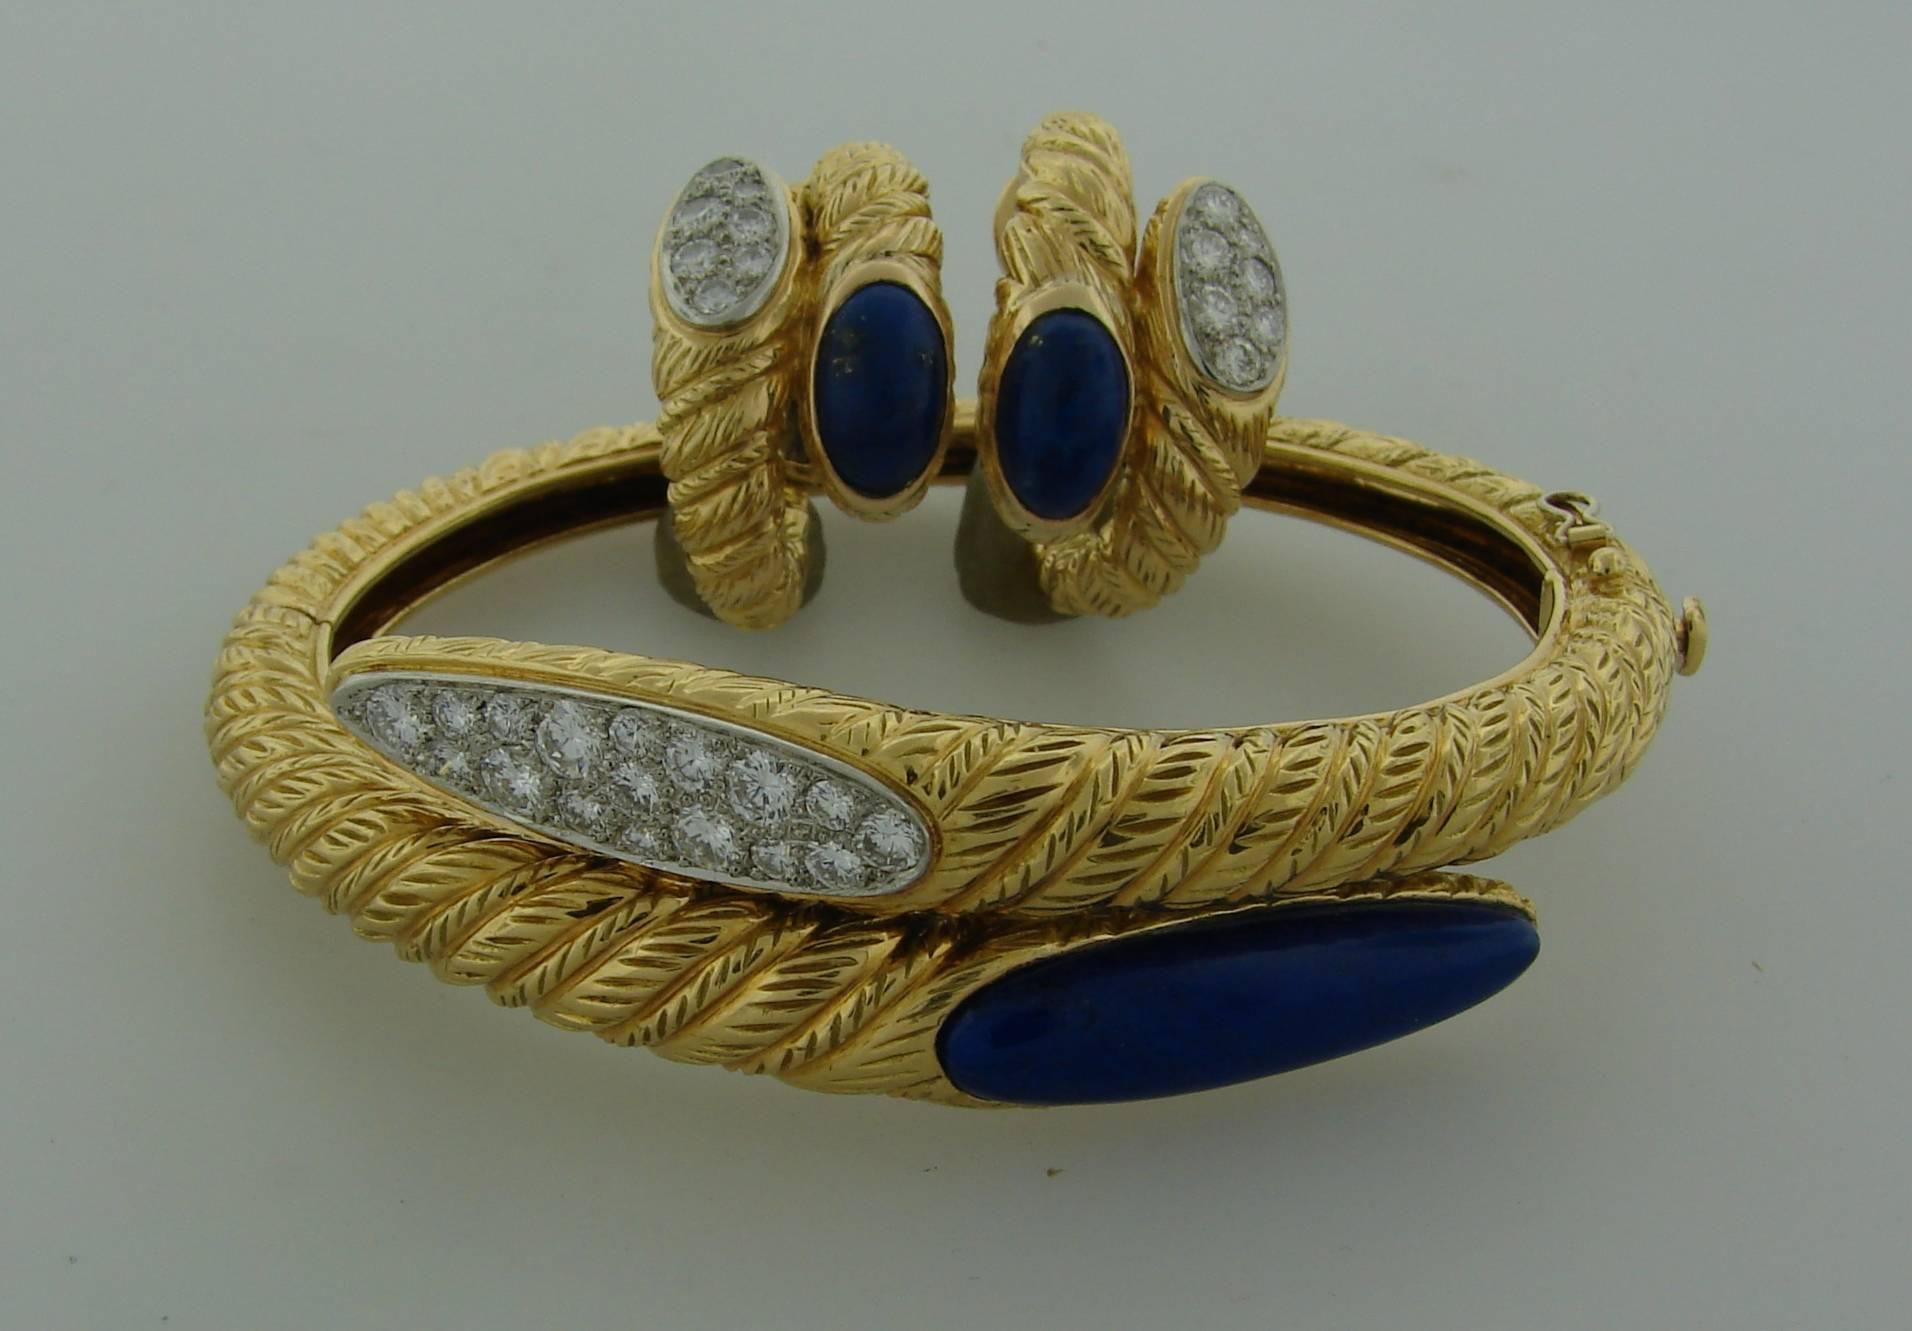 Chic and feminine set consisting of a pair of earrings and a bracelet that would be a great addition to your jewelry collection. It was created by Van Cleef & Arpels in Paris in the 1970's. it is made of 18 karat (stamped) yellow gold, lapis lazuli